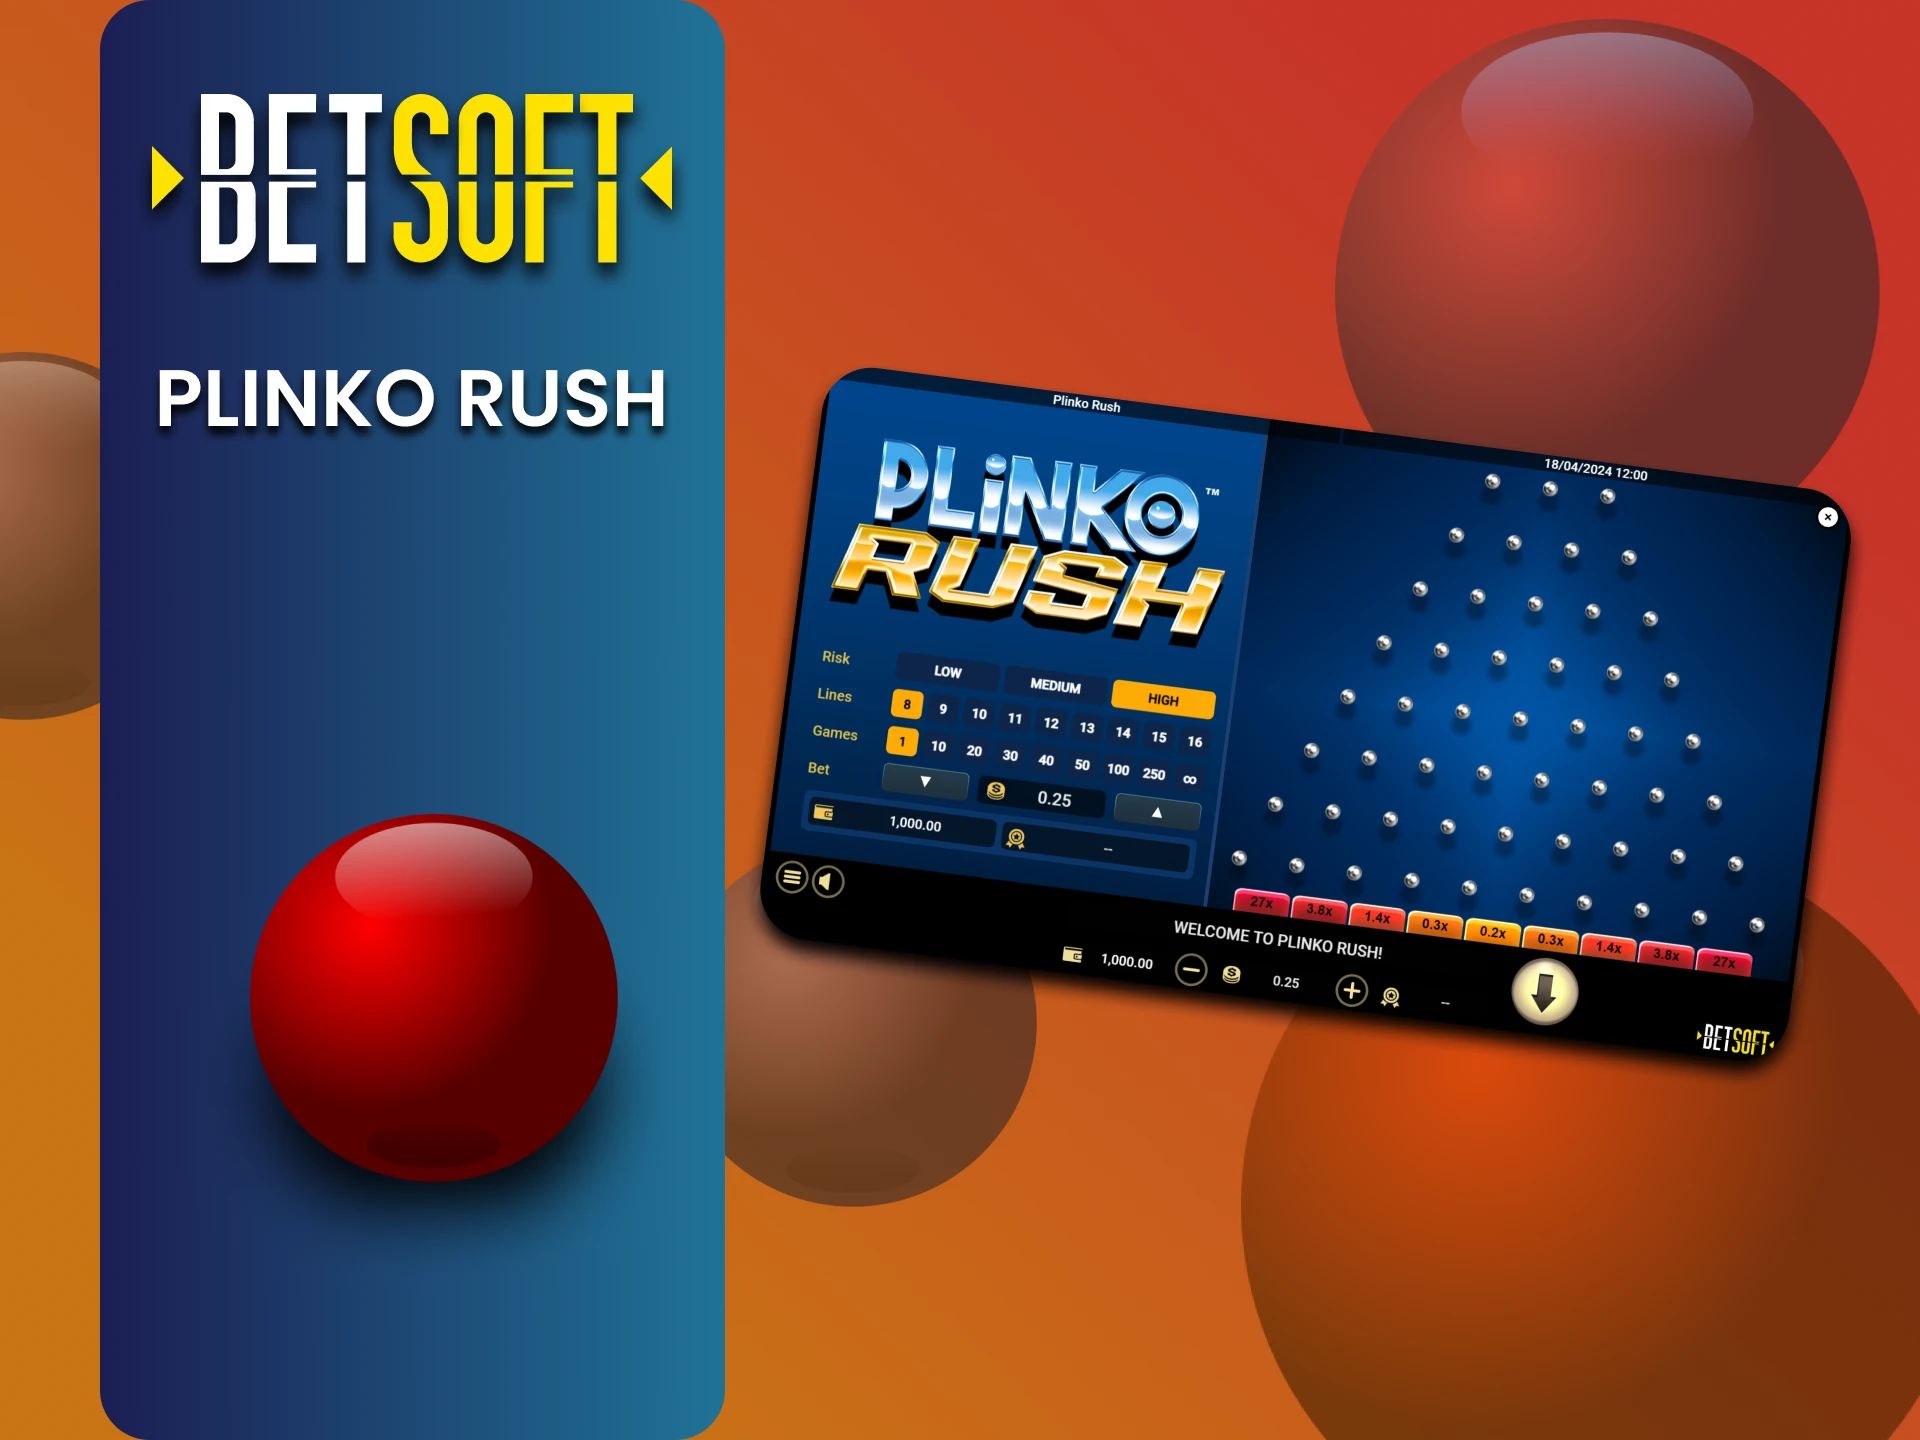 Try your hand at the game Plinko Rush from the provider Betsoft.